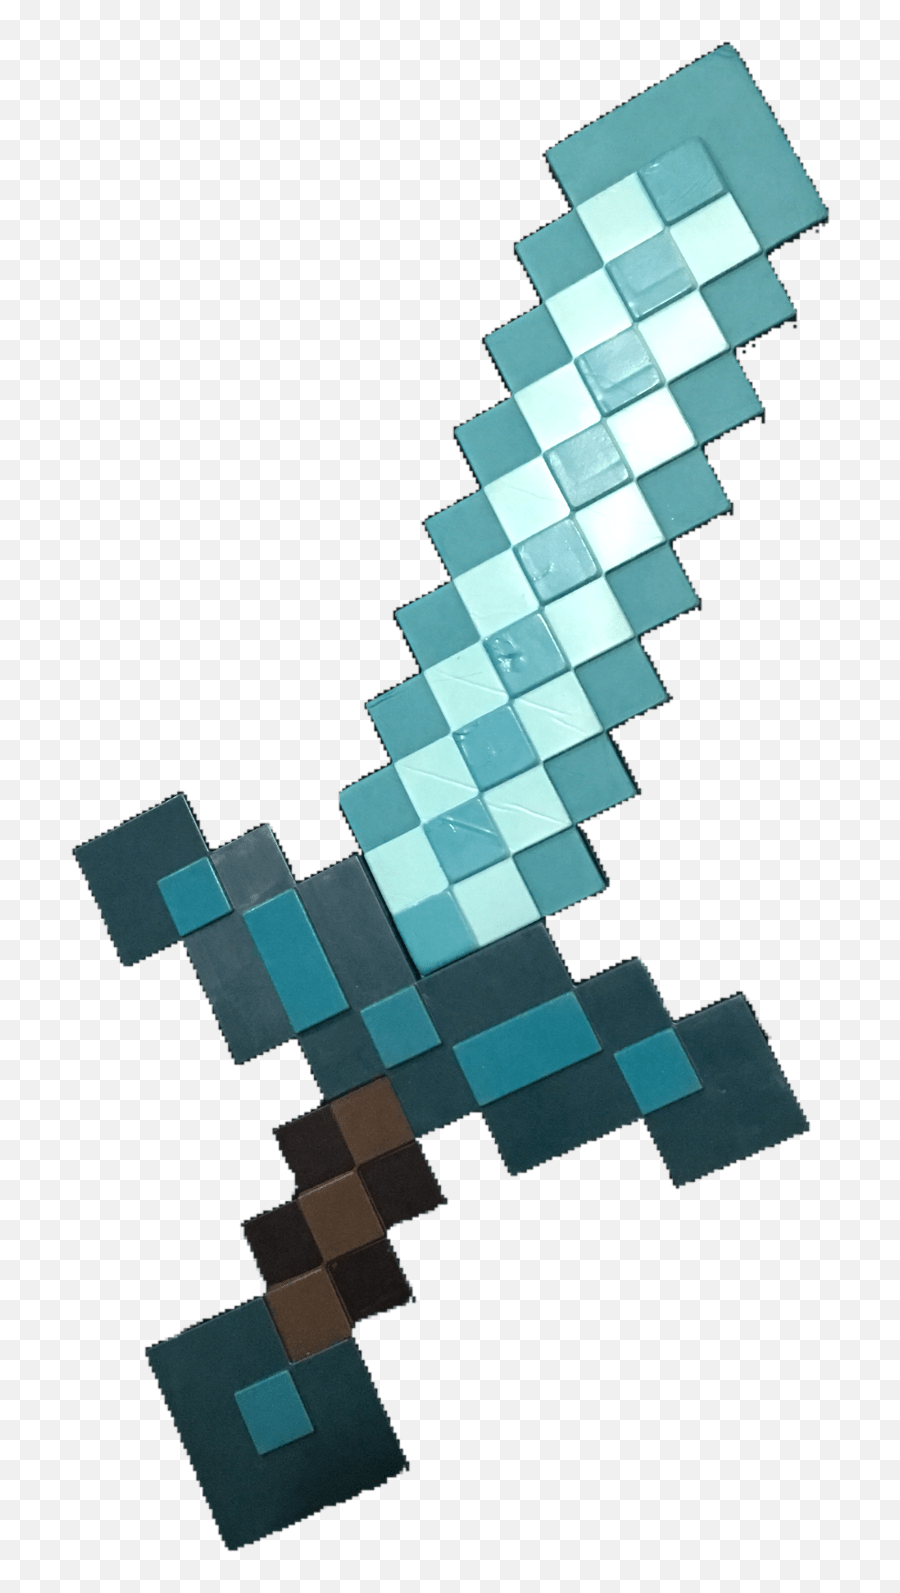 Minecraft Sword Epic Photobooth Perth Minecraft Sword Png Minecraft Sword Png Free Transparent Png Images Pngaaa Com